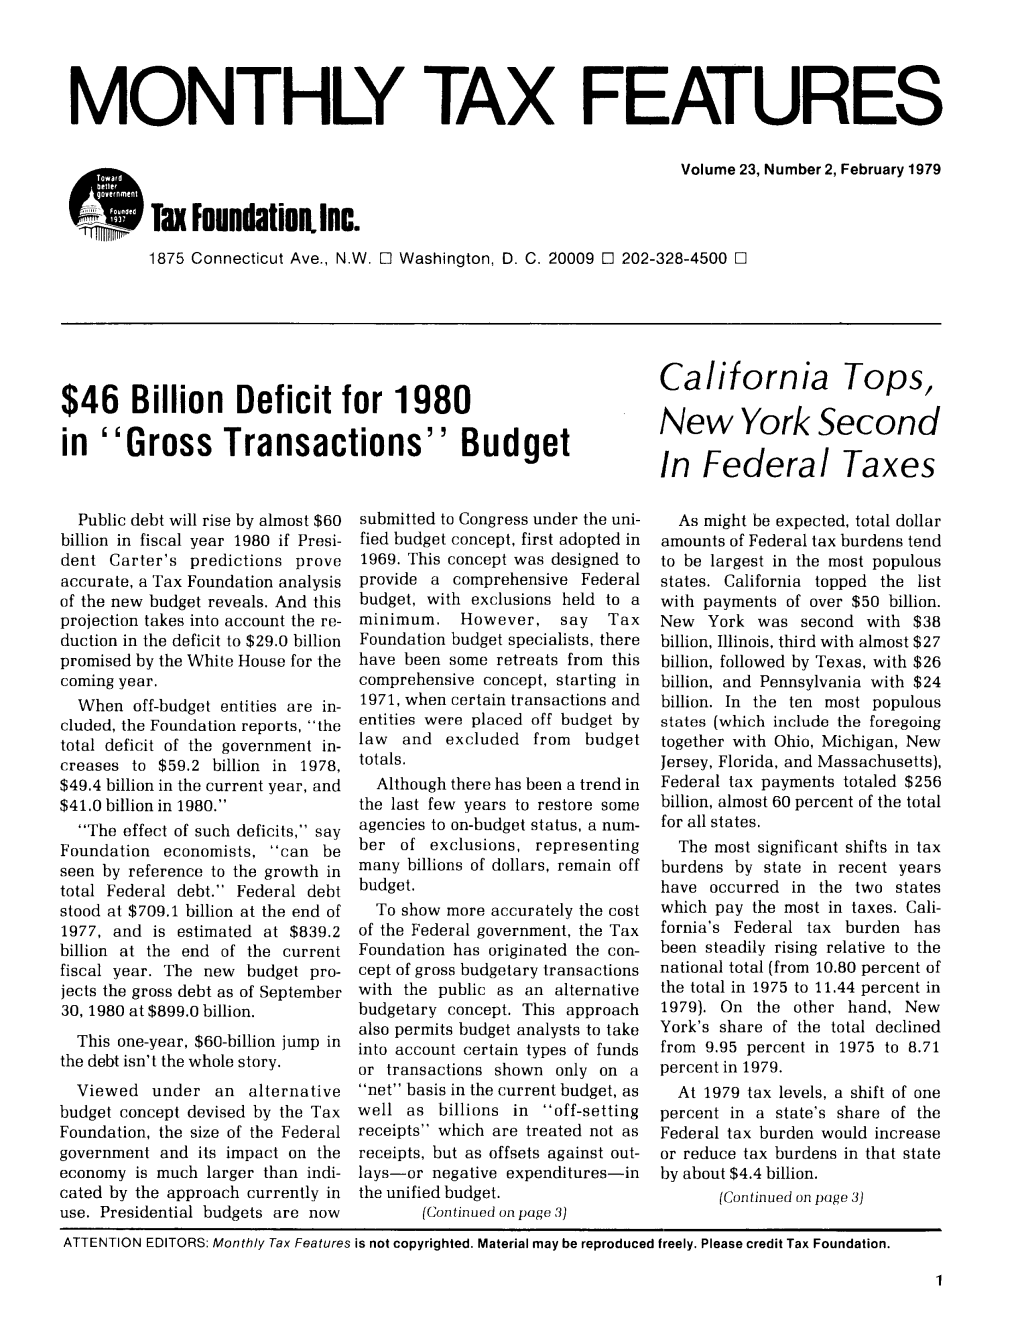 Tax Features Volume 23 Number 2 February 1979